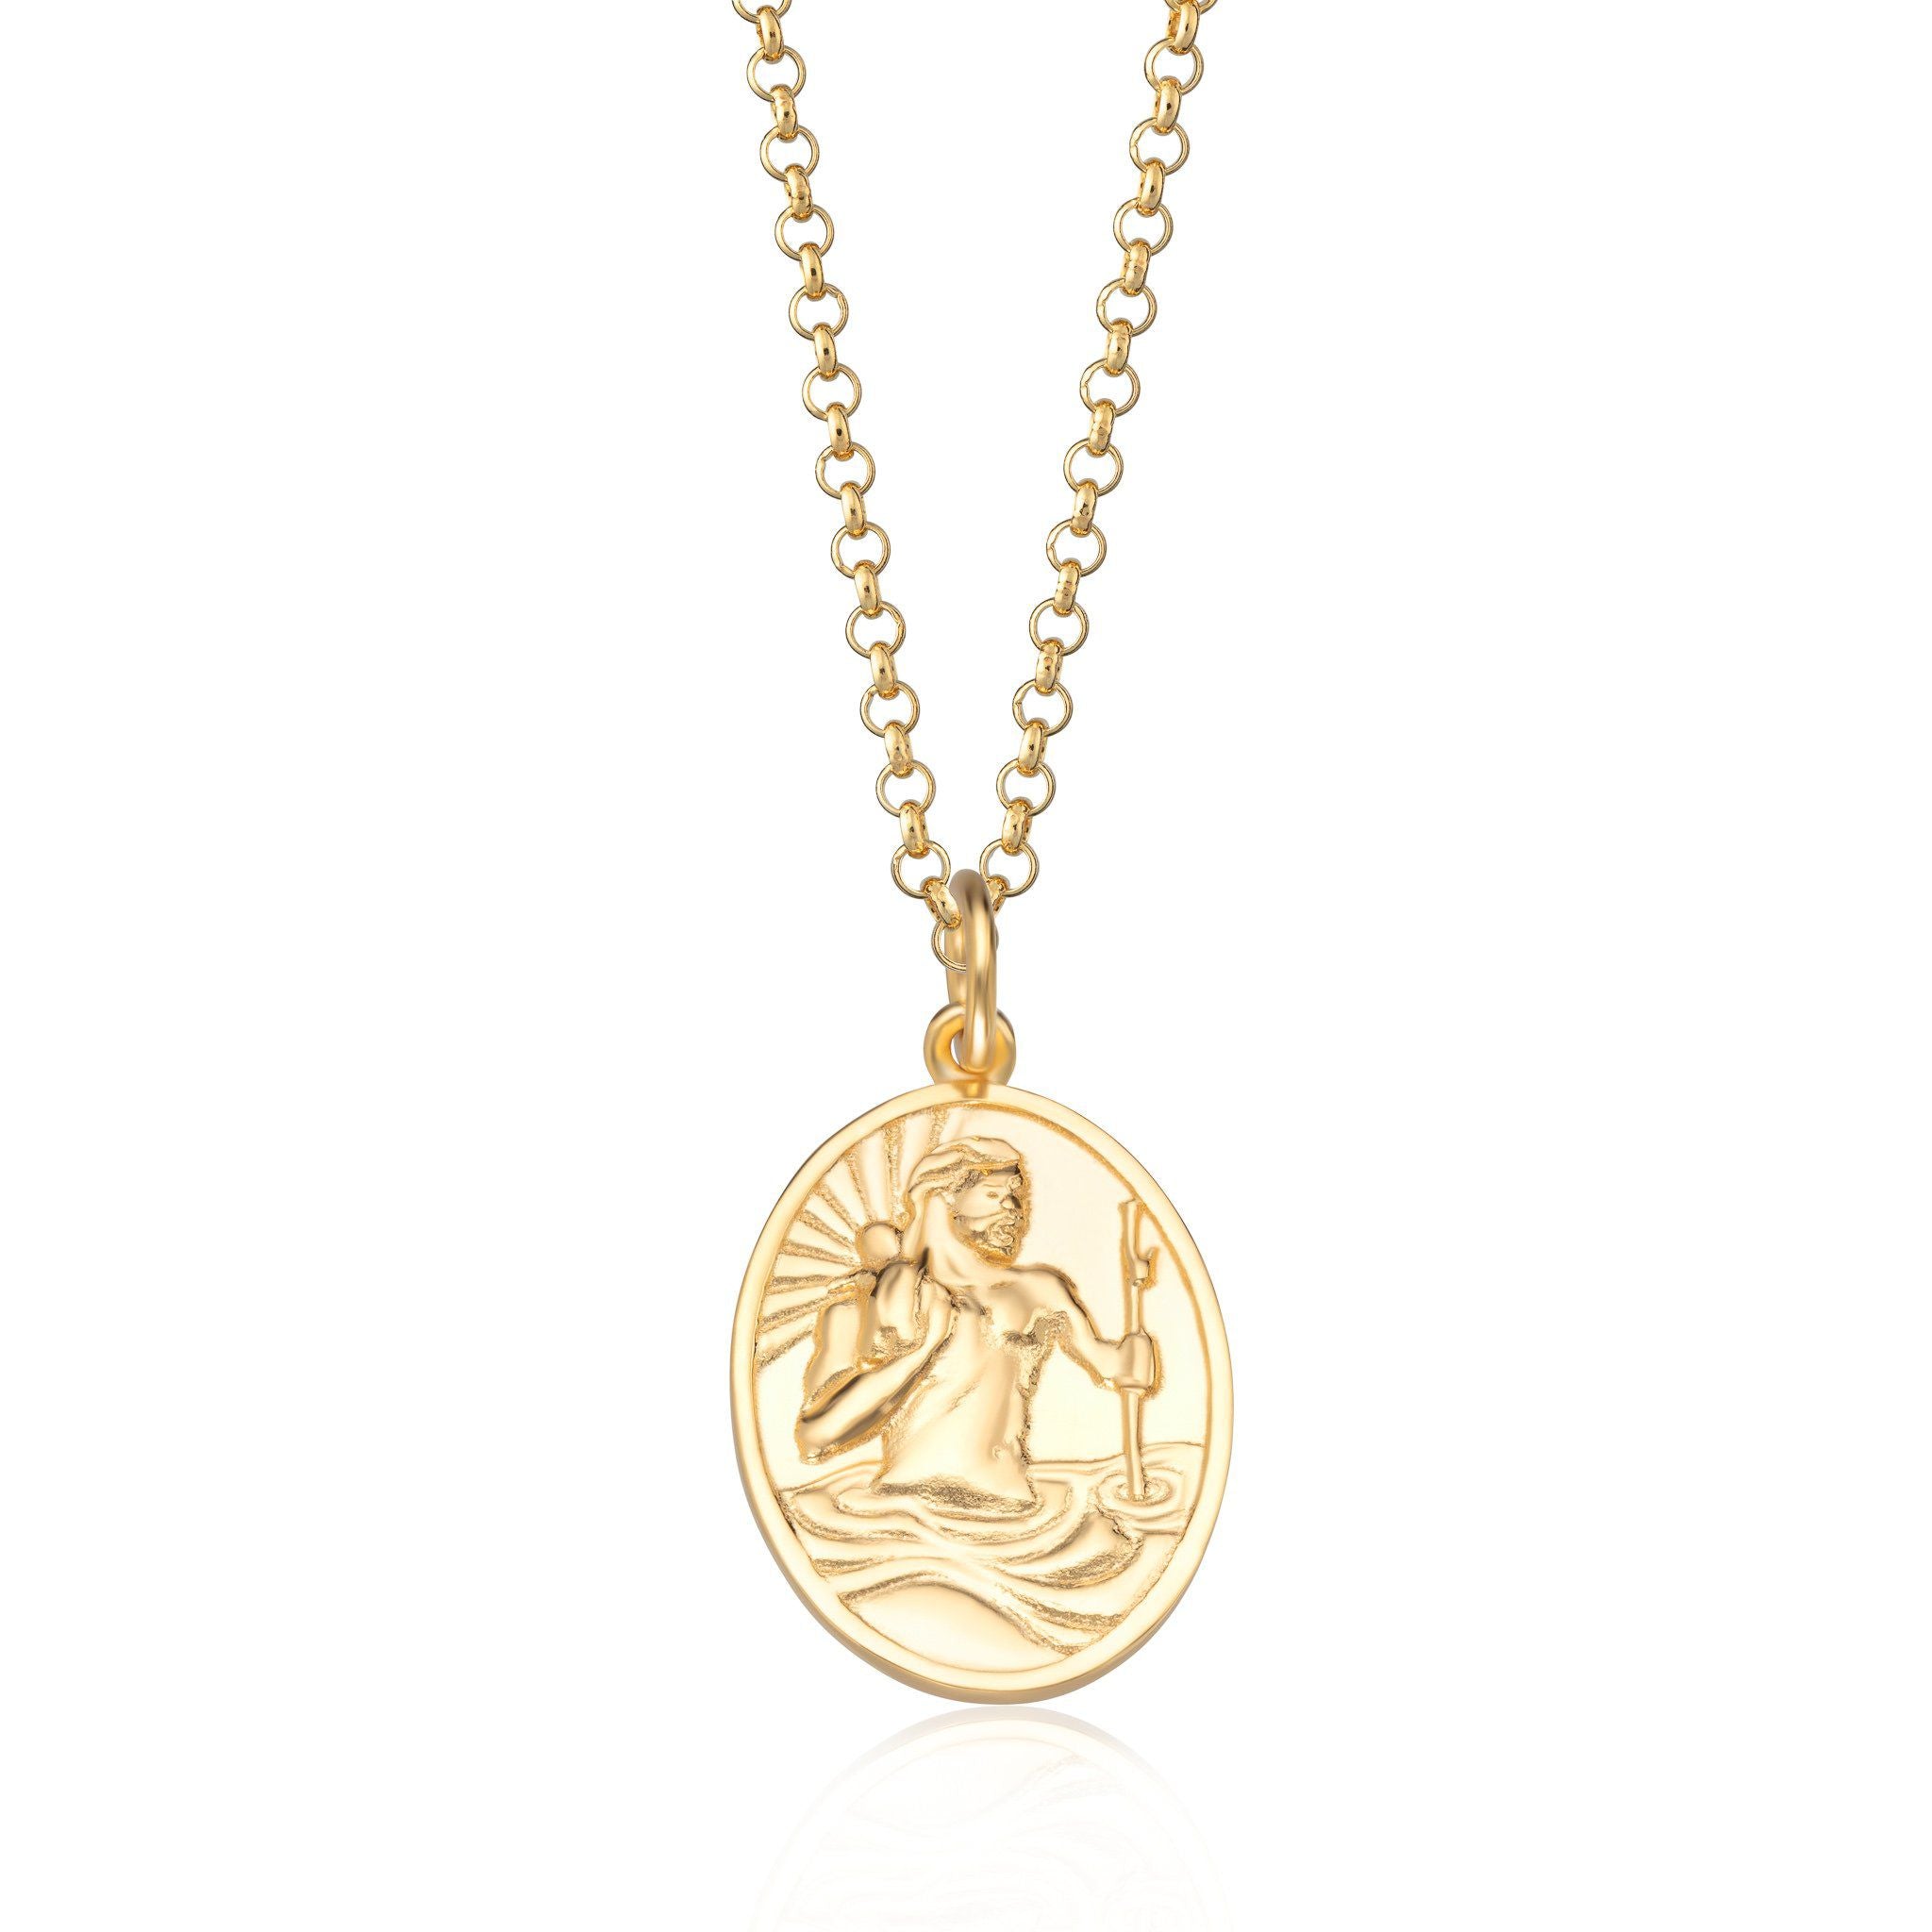  St Christopher Necklace - by Scream Pretty